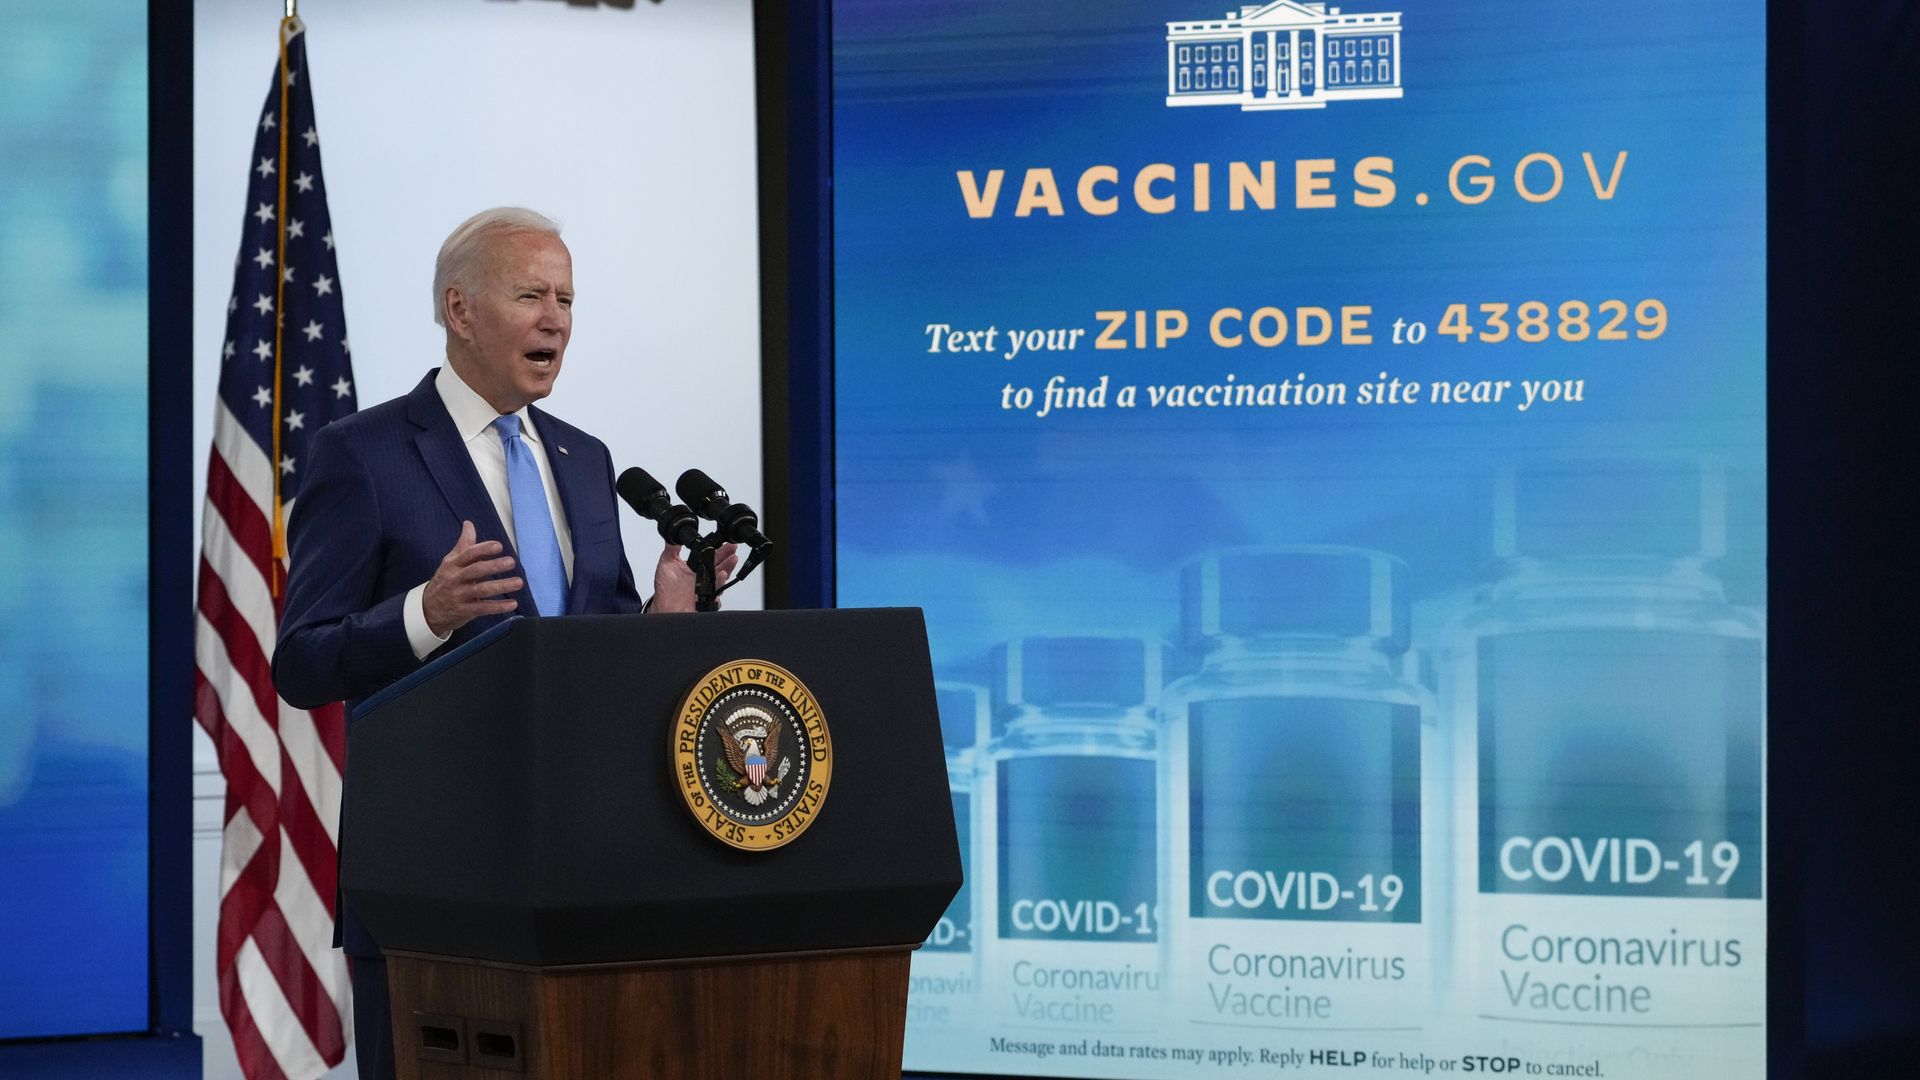 Photo of Joe Biden speaking from behind a podium with a screen next to him that says "text your zip code to find a vaccine site"